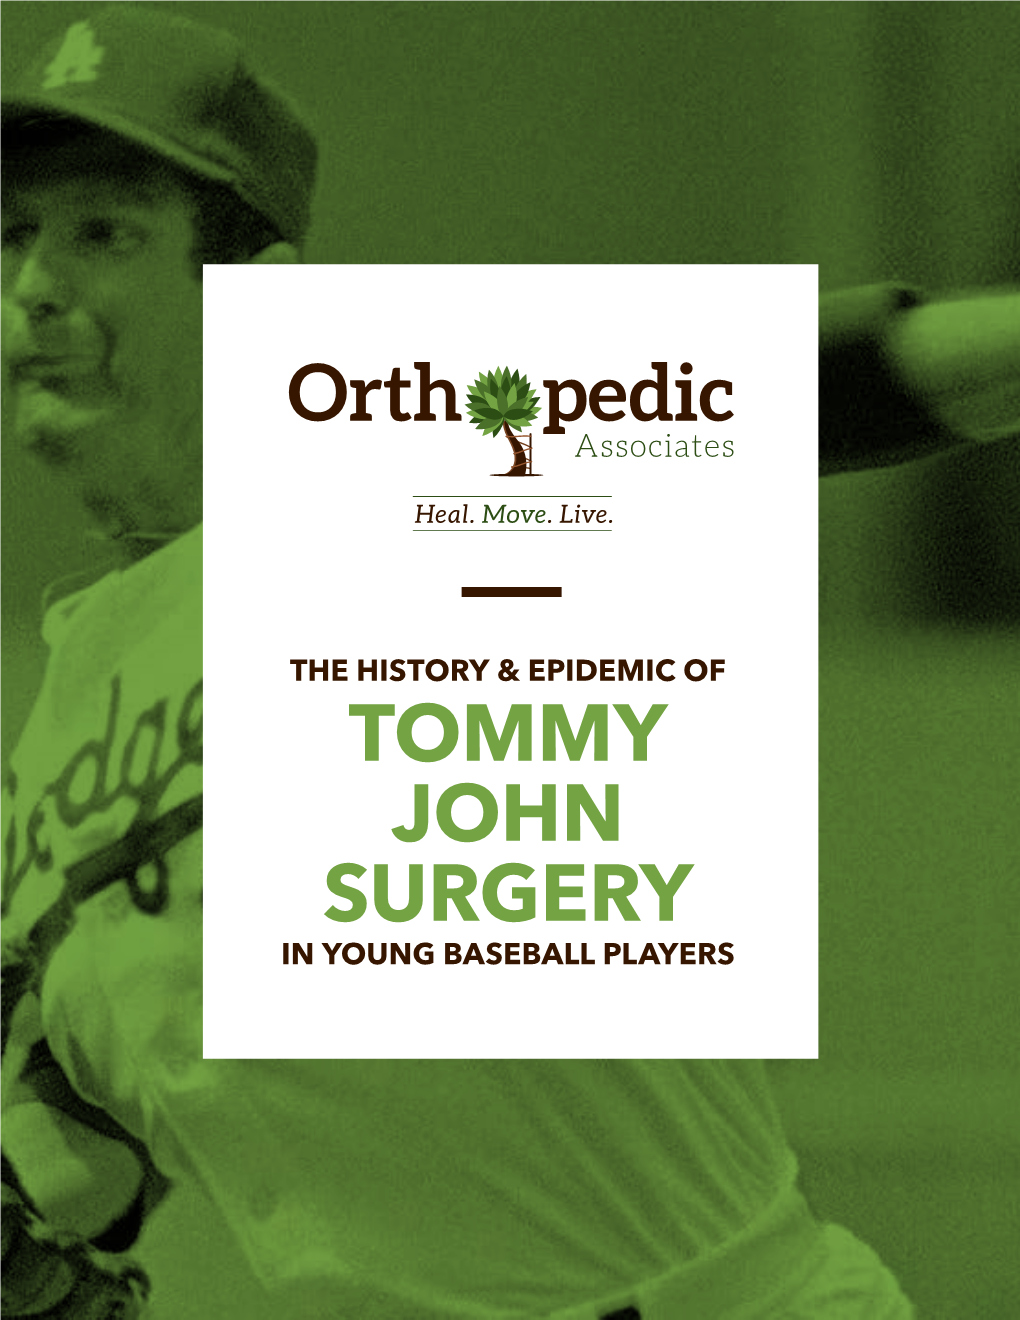 TOMMY JOHN SURGERY in YOUNG BASEBALL PLAYERS Baseball Is As American As Apple Pie, Ford Trucks, and Craftsman Wrenches